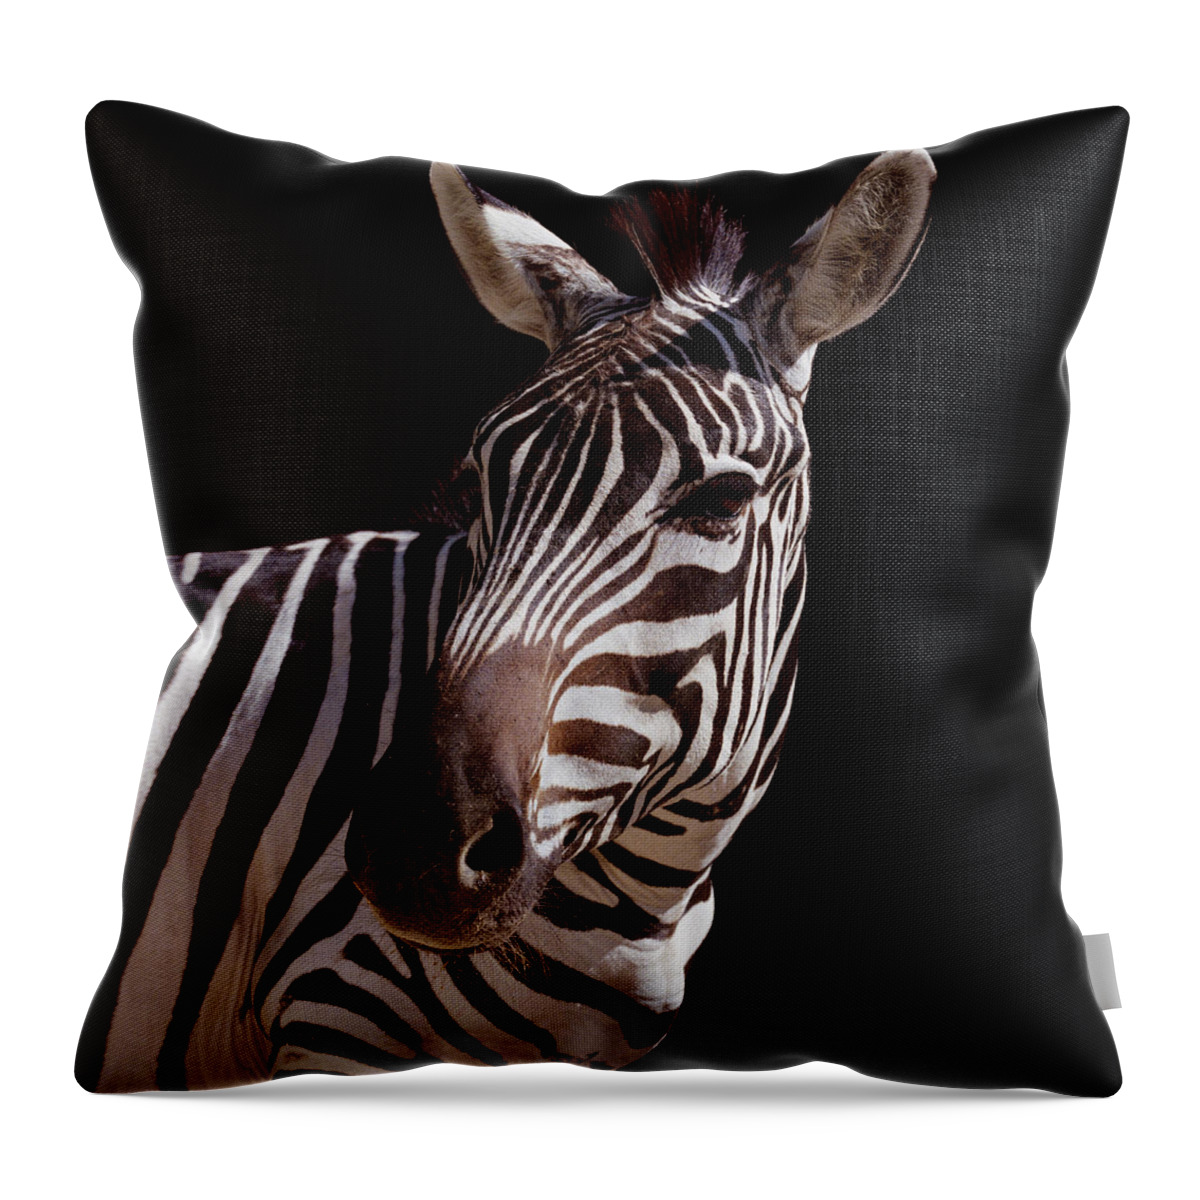 Black Color Throw Pillow featuring the photograph Zebra Equus Sp., Close-up by Chad Baker/jason Reed/ryan Mcvay